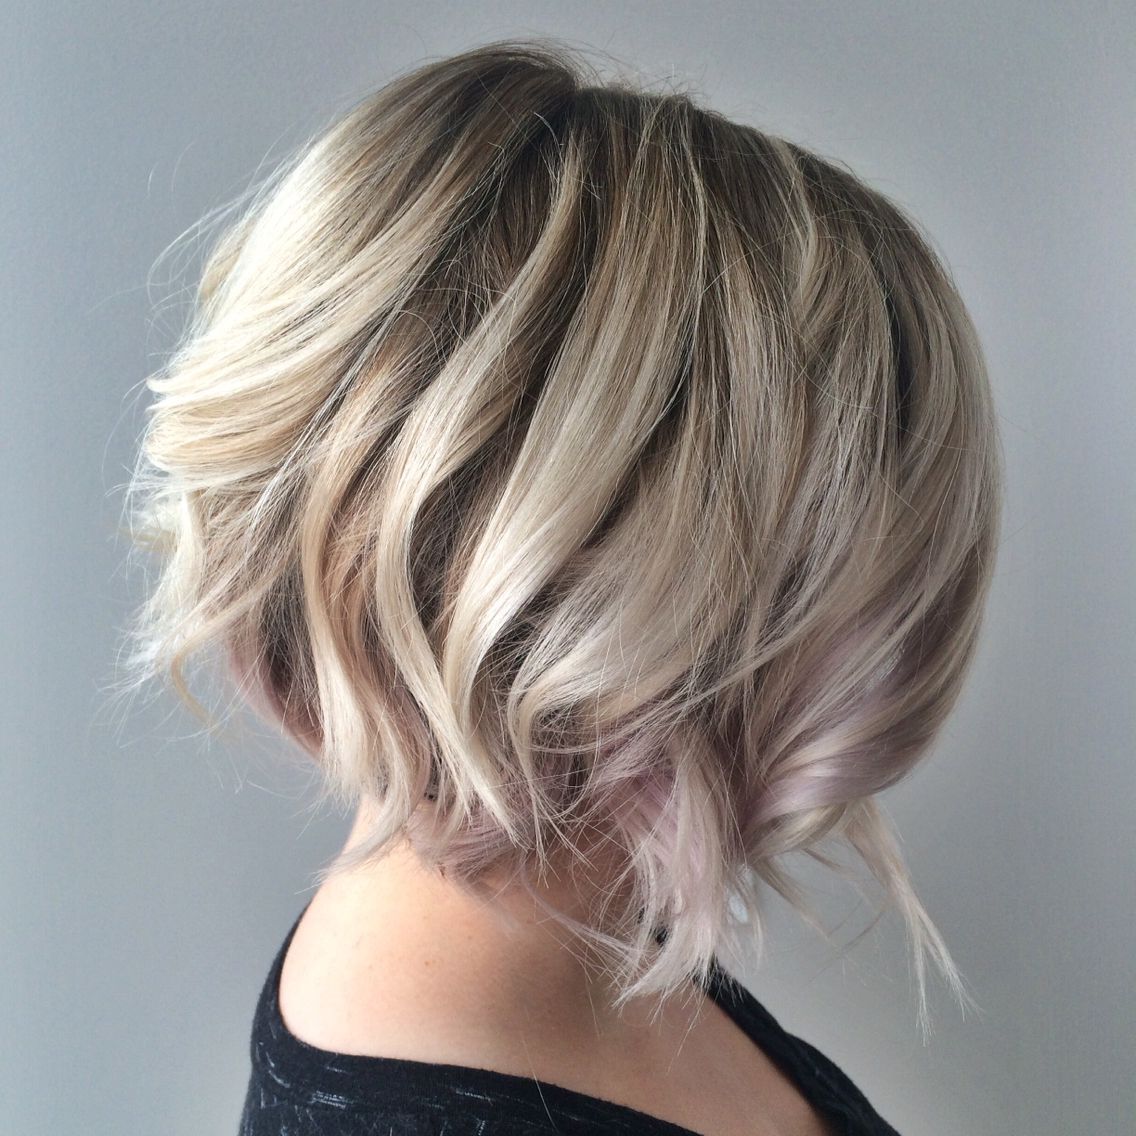 Pin On Beauty Inside Platinum Balayage On A Bob Hairstyles (View 22 of 25)